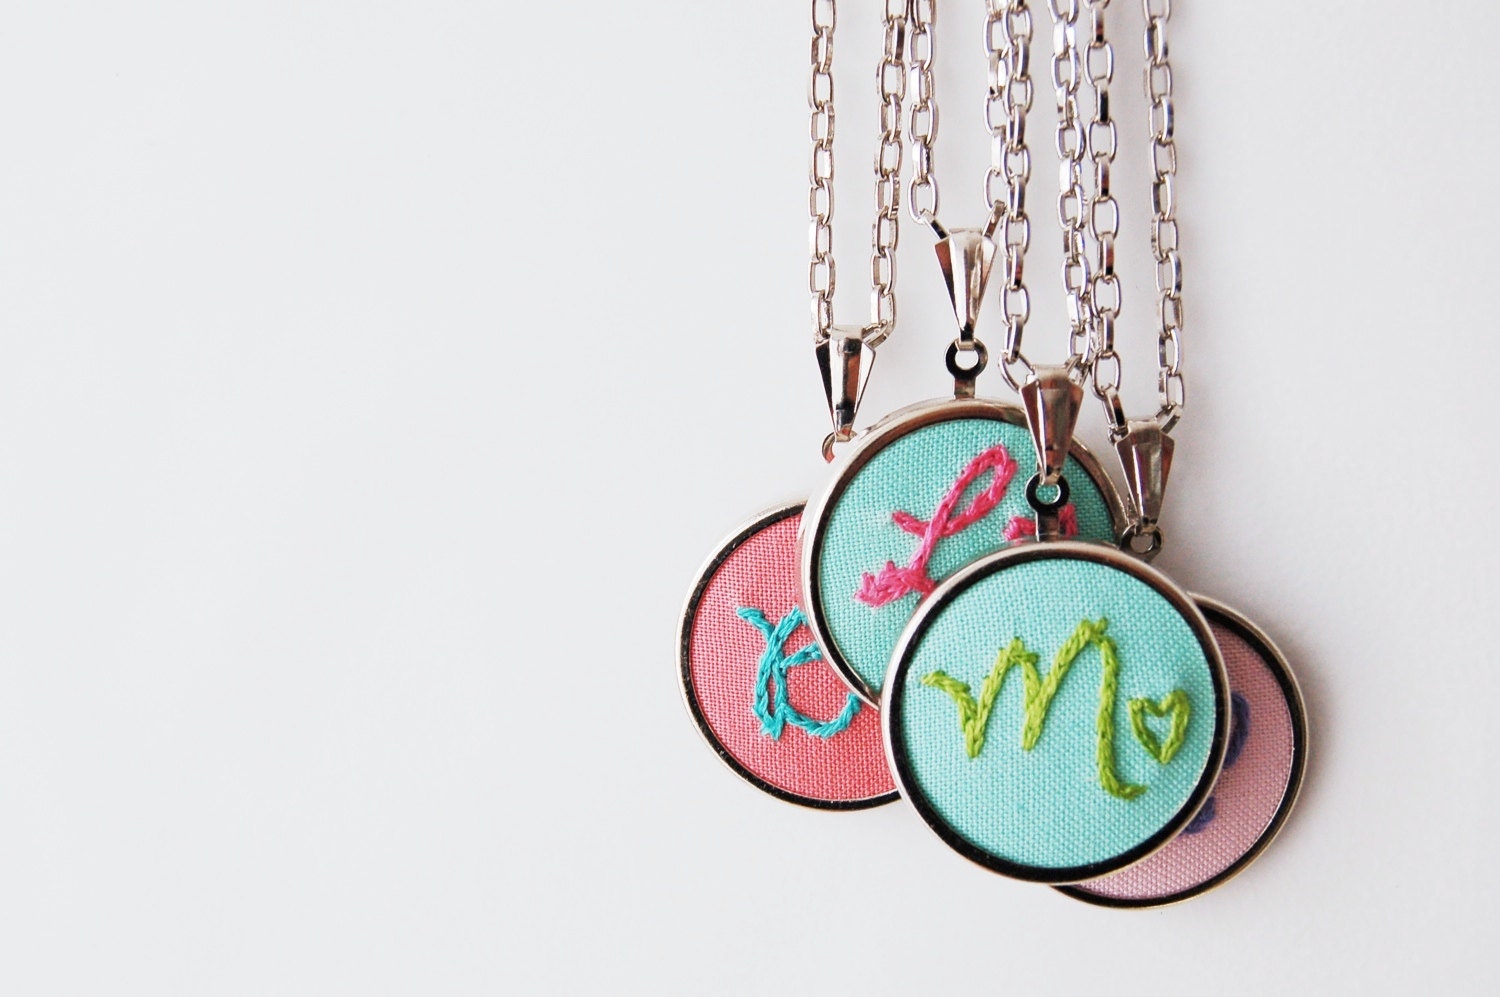 Personalized Fabric Initial Necklace. Stitched Initial and Heart Pendant. Embroidered by Merriweather Council on etsy - merriweathercouncil